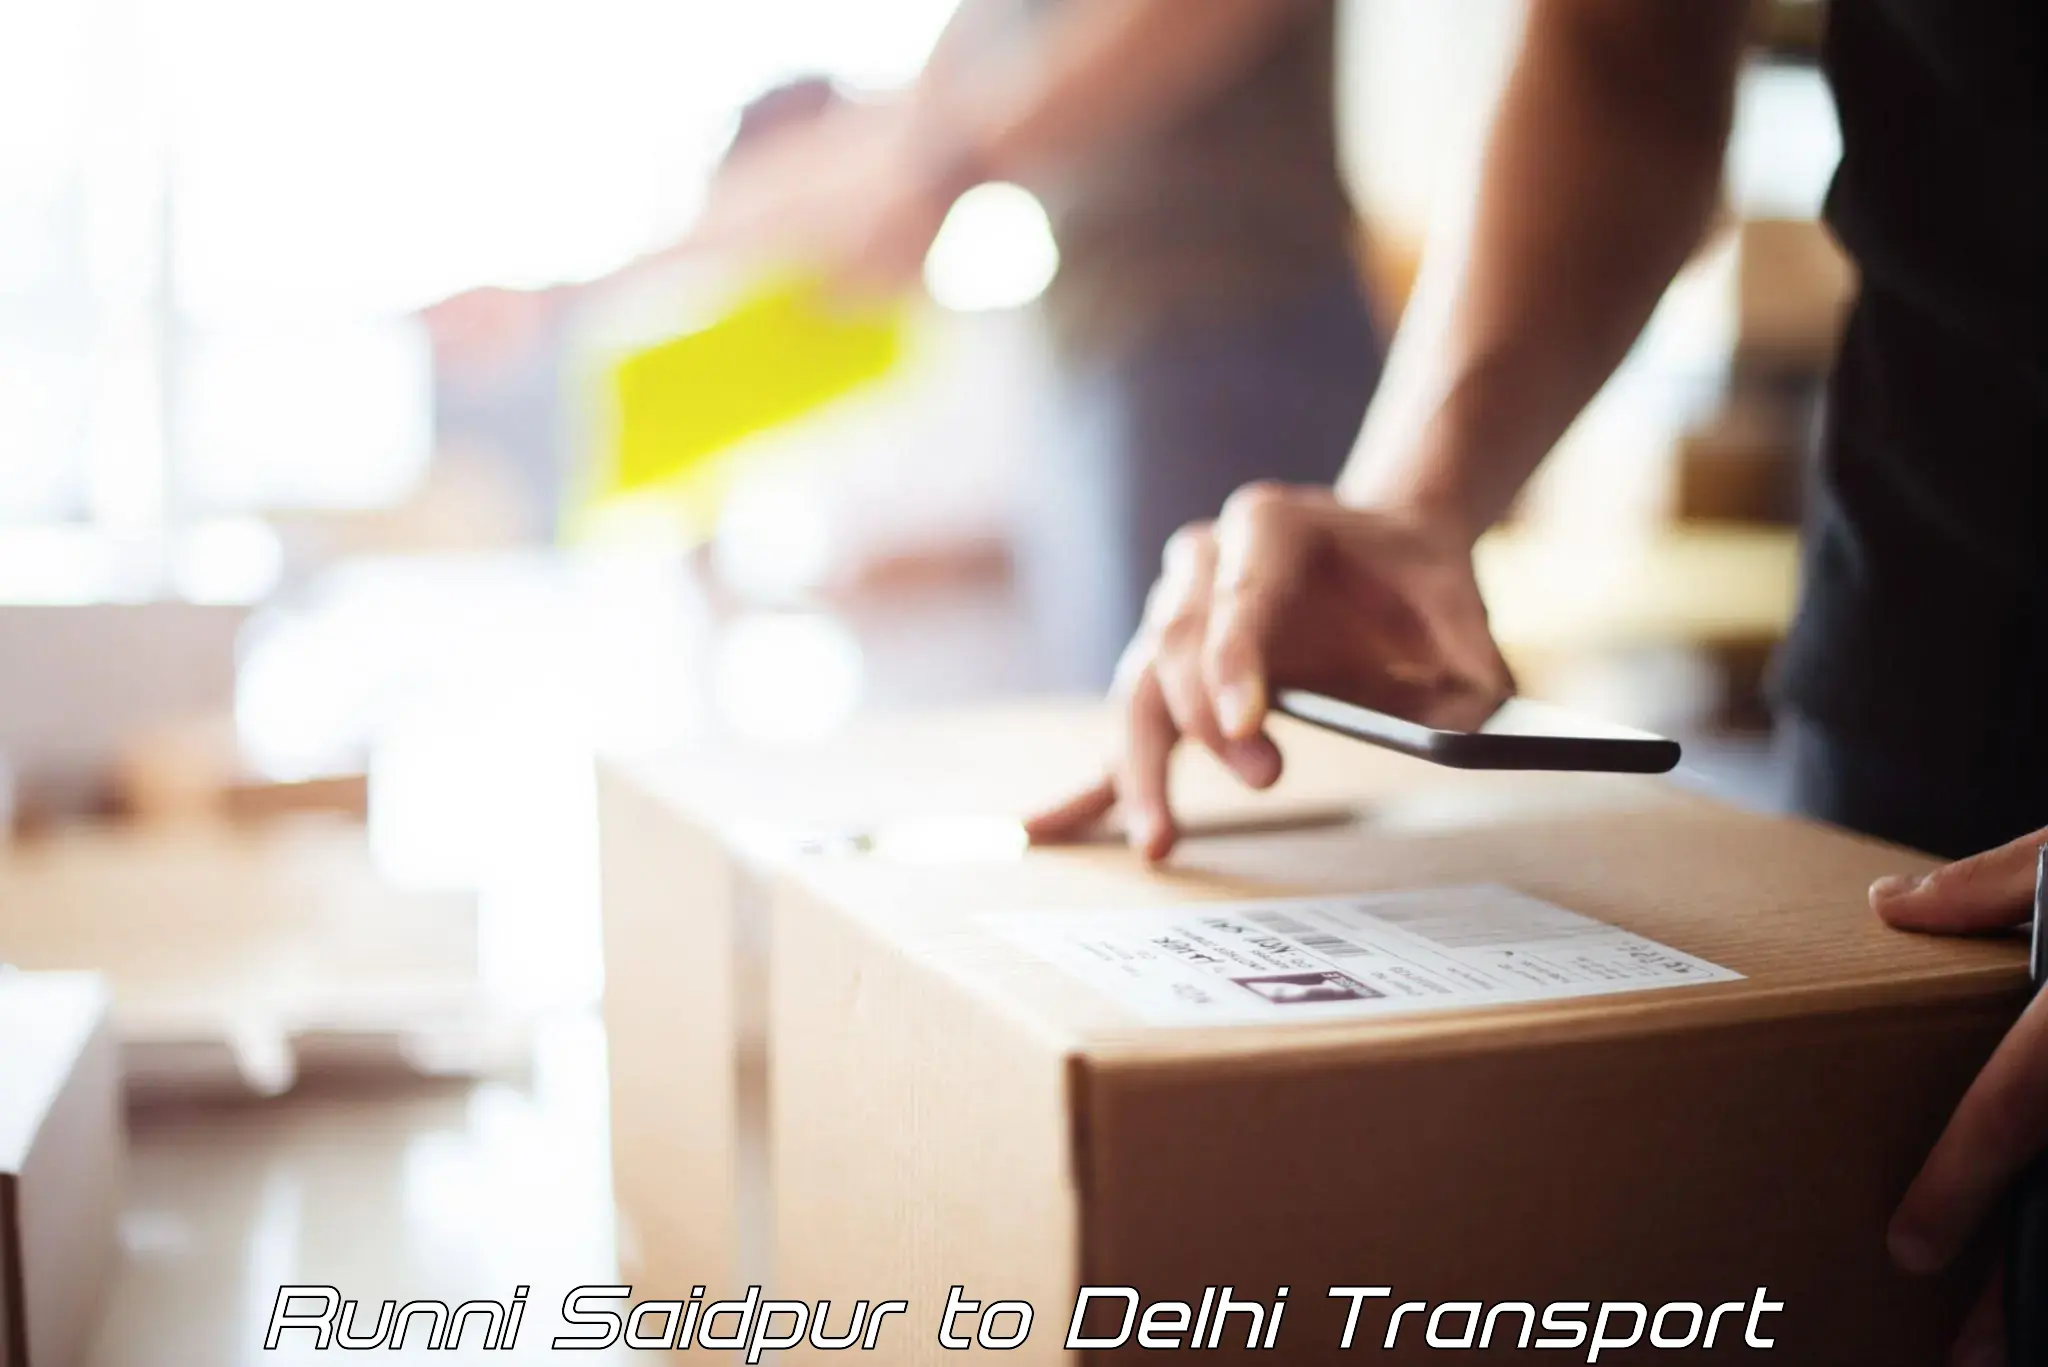 Nationwide transport services Runni Saidpur to East Delhi